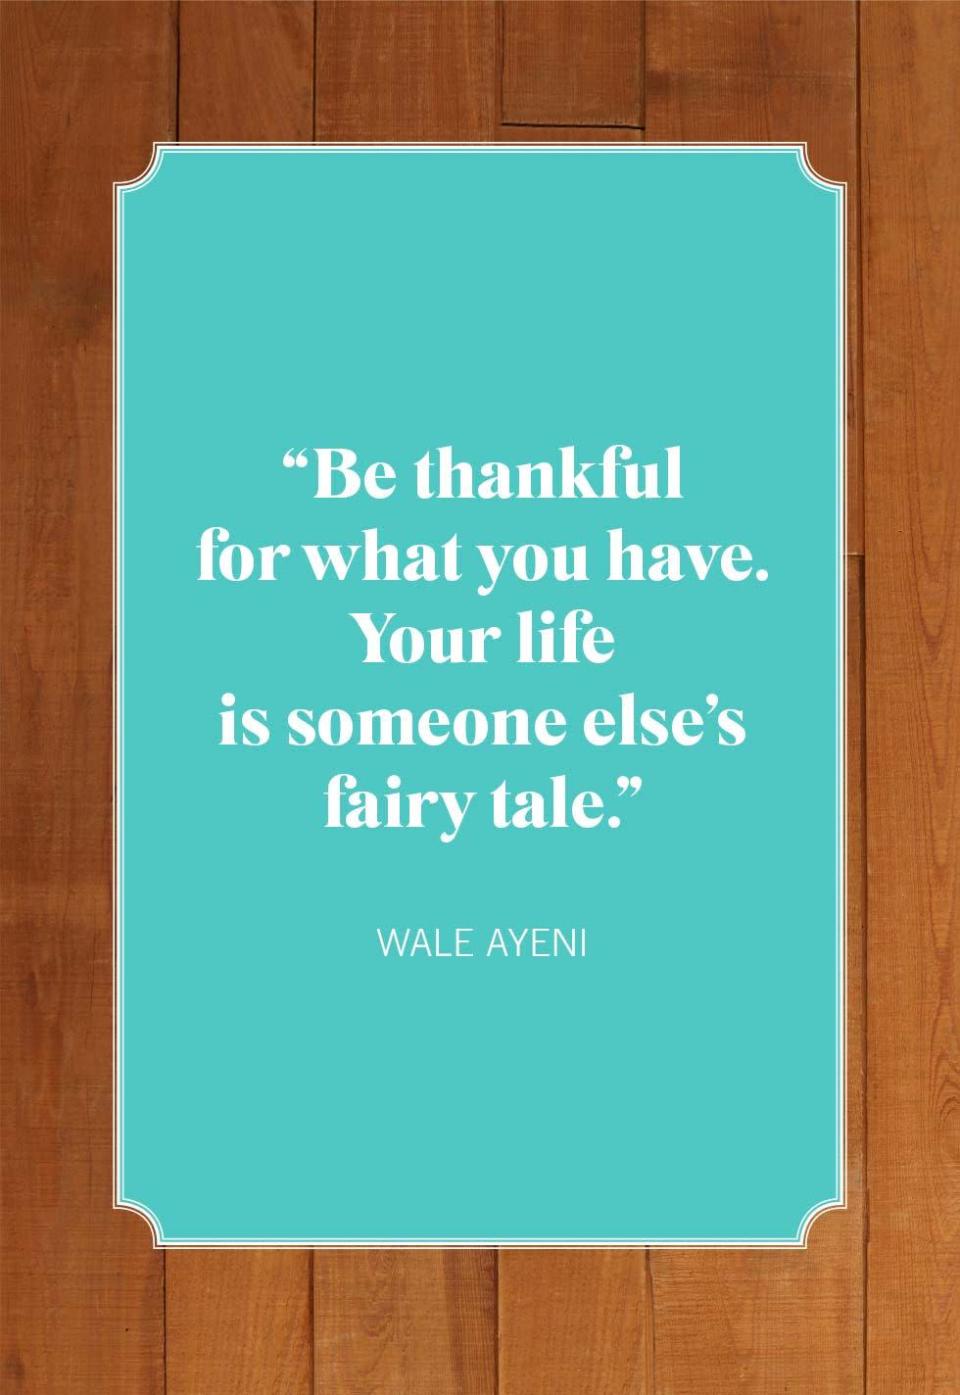 <p>“Be thankful for what you have. Your life is someone else’s fairy tale.”</p>